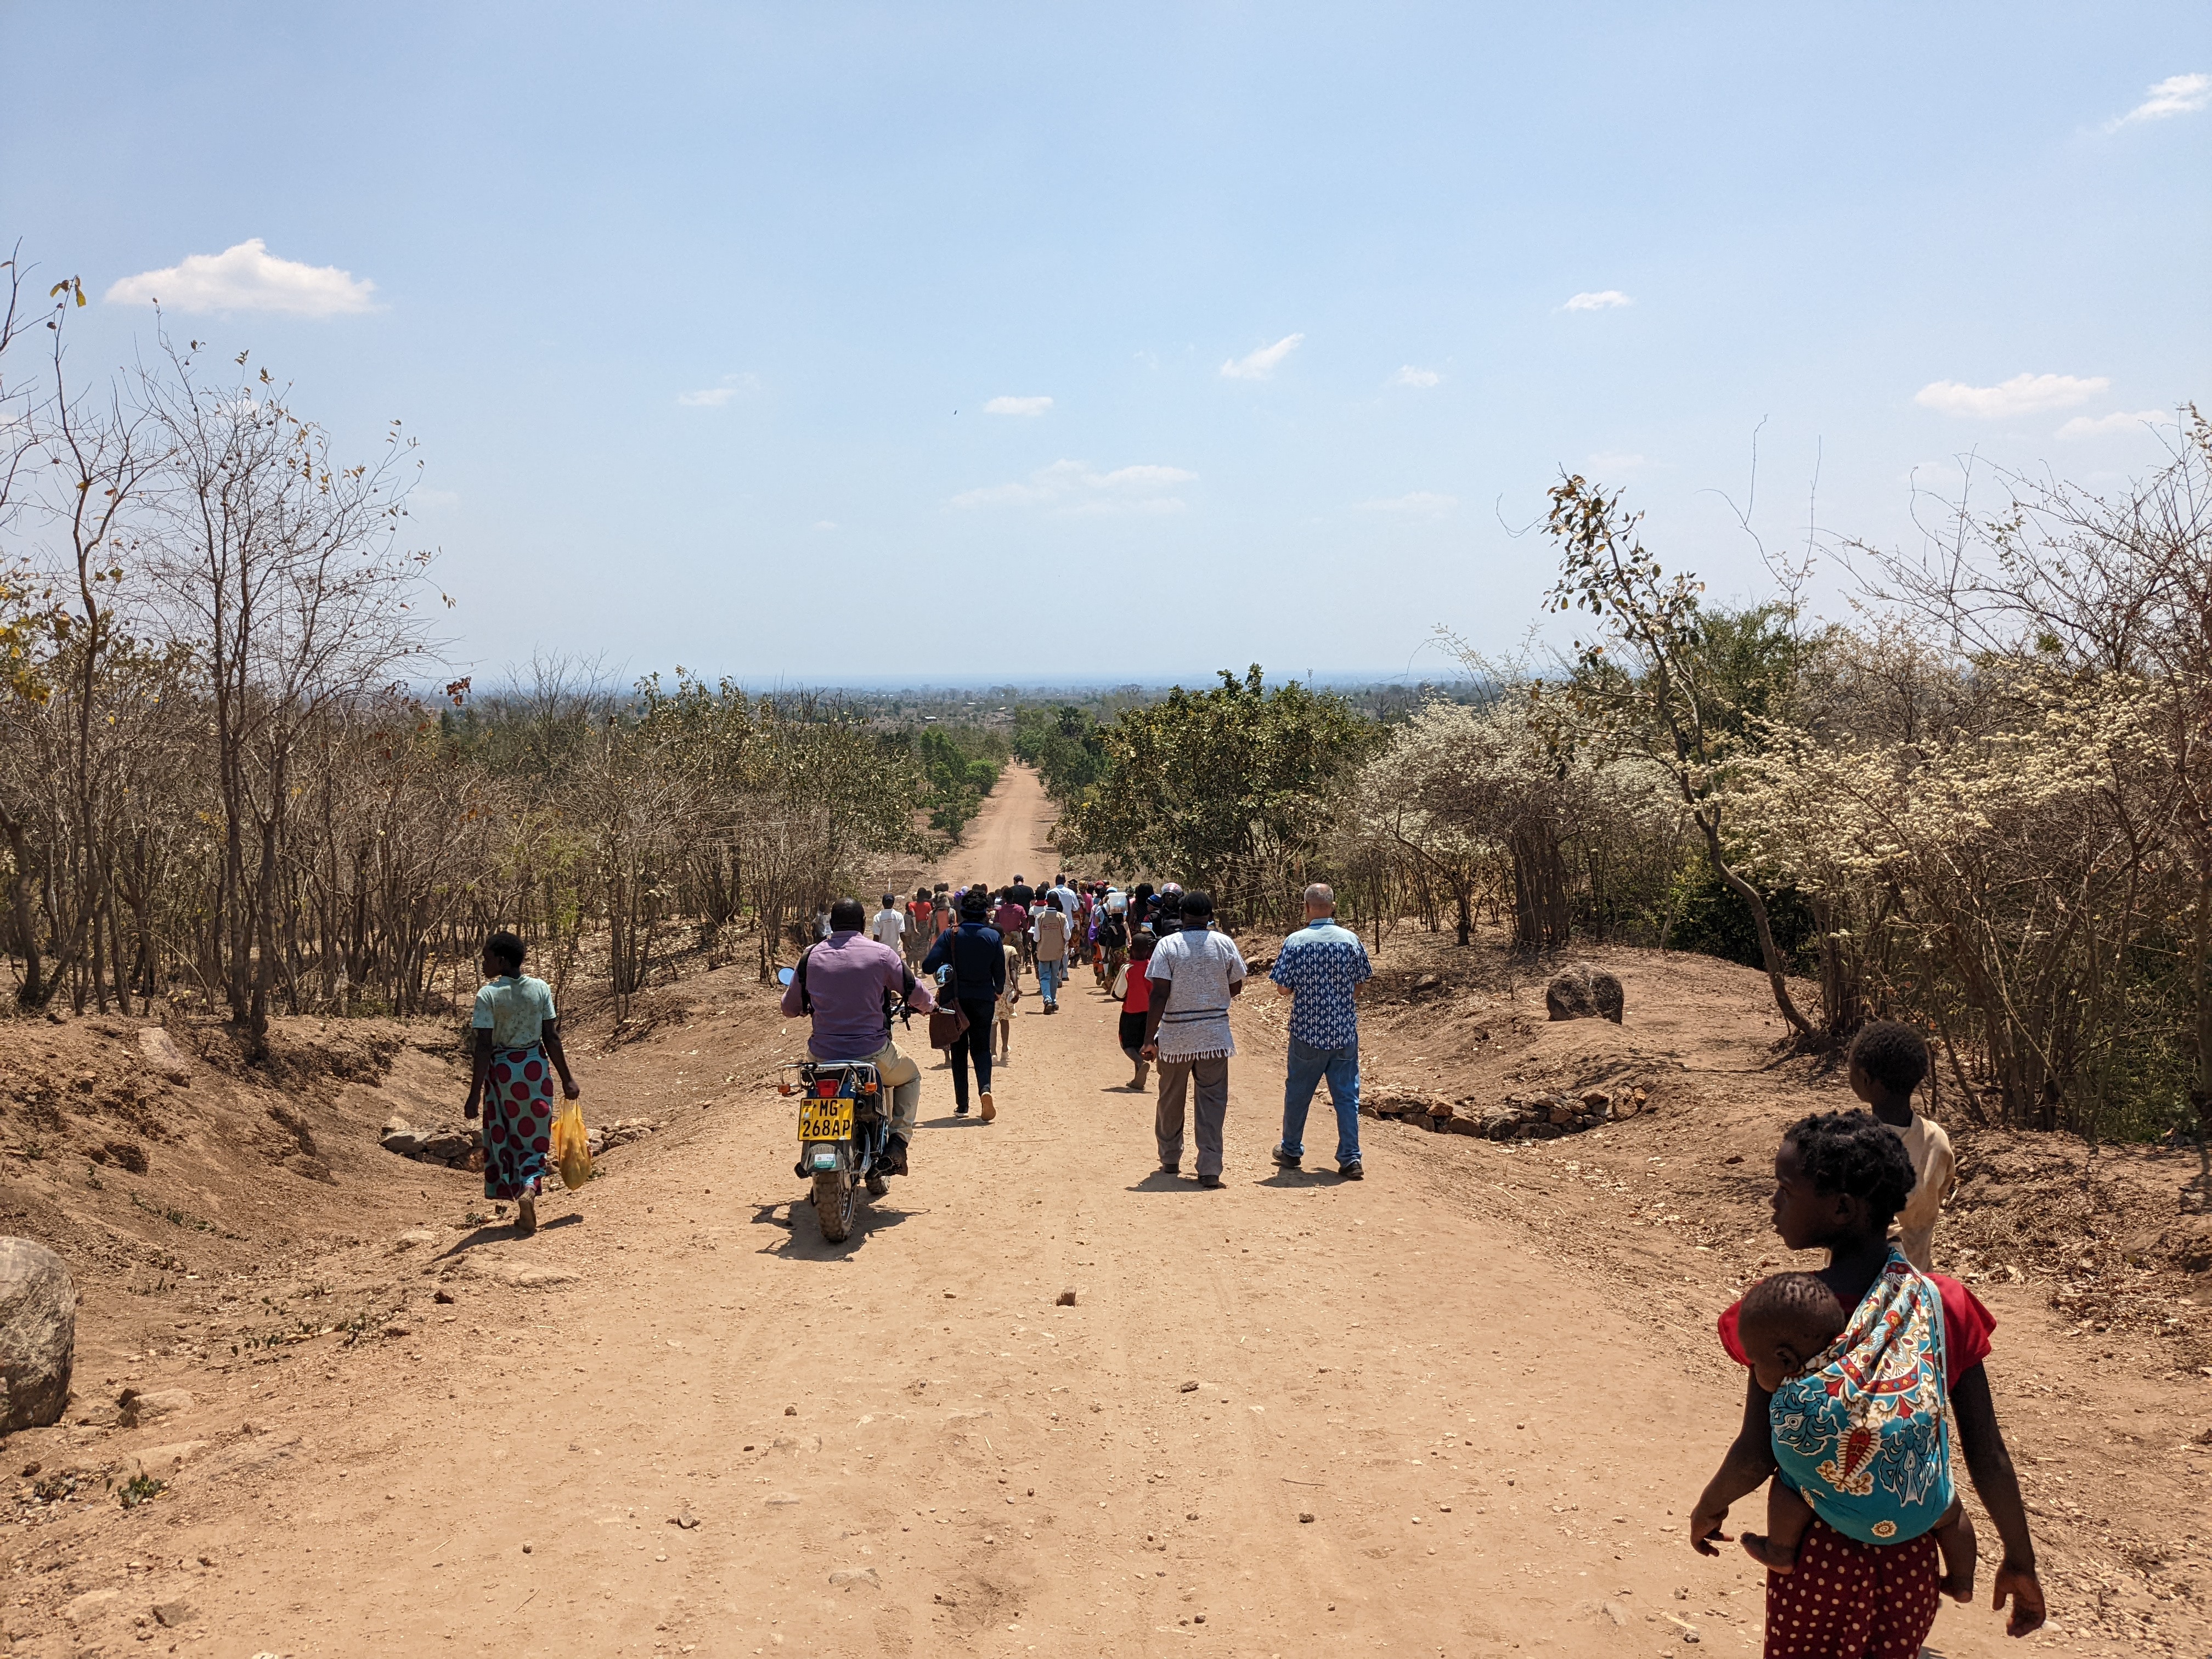 Community members in Zomba lead RFS stakeholders downslope to show the different erosion control methods and sustainable agricultural techniques they are now implementing in their landscape. (c: ICRAF)